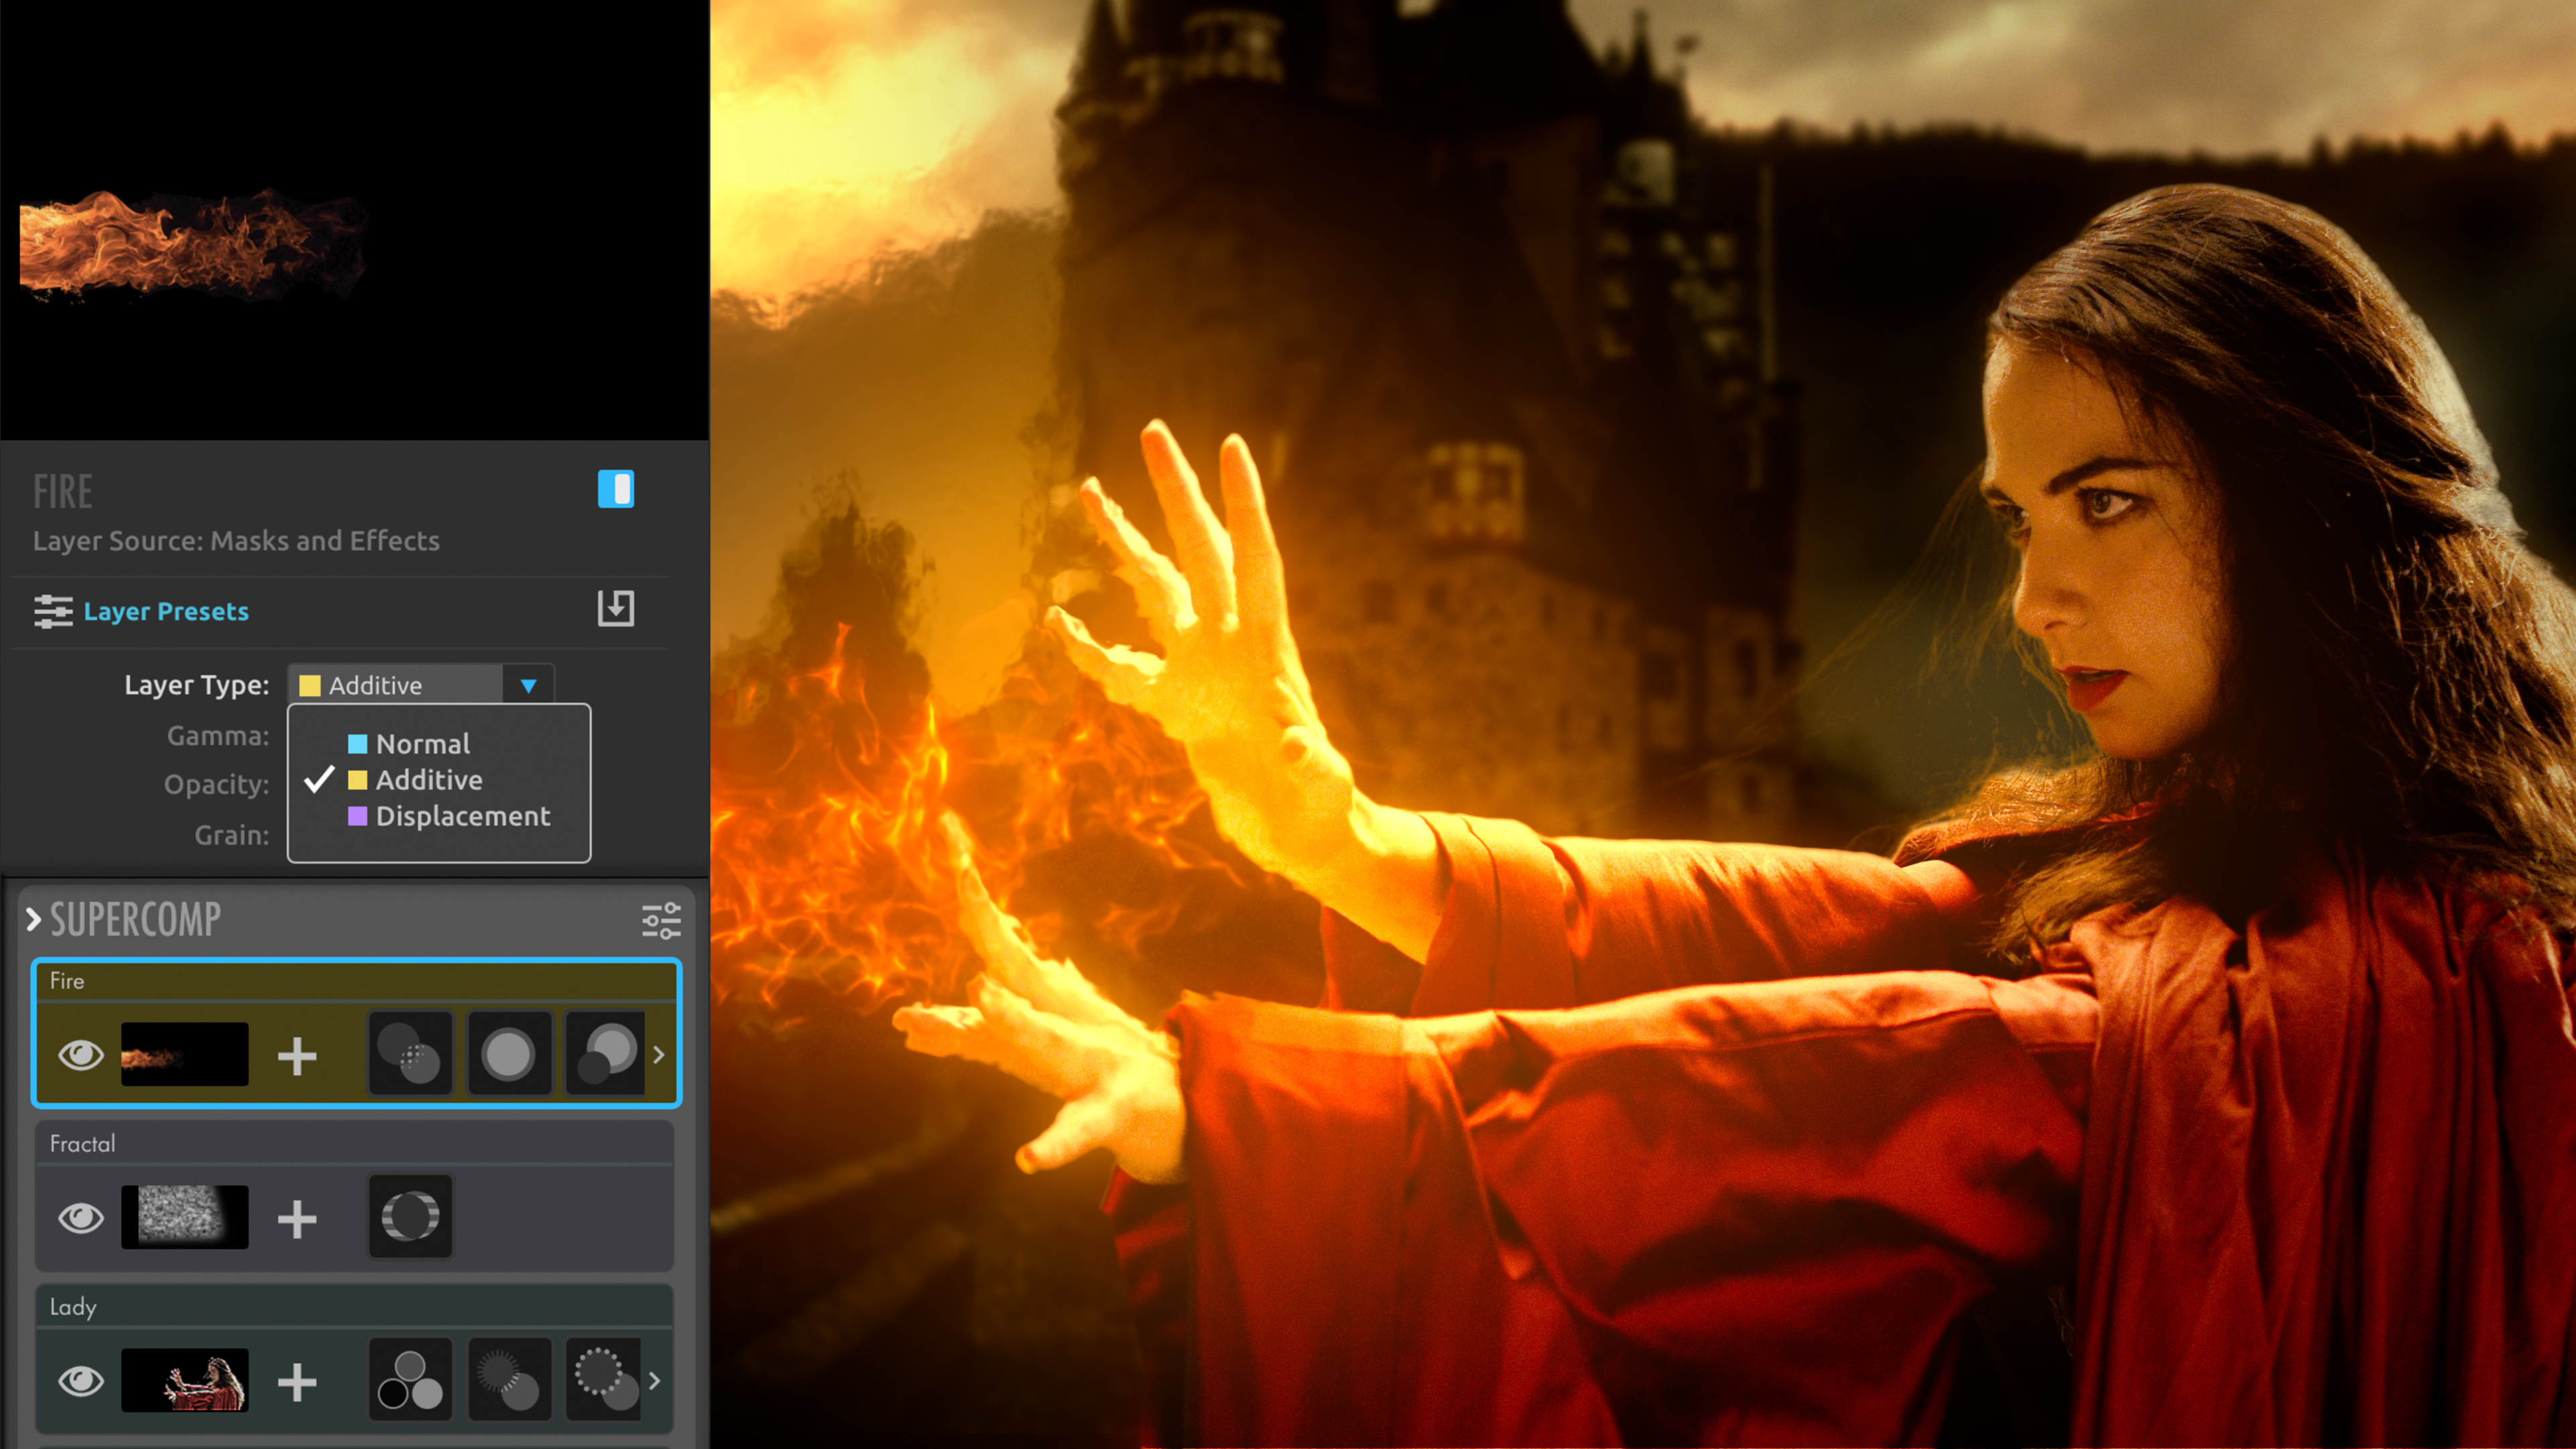 Red Giant VFX Suite 2023.4 instal the new version for ios